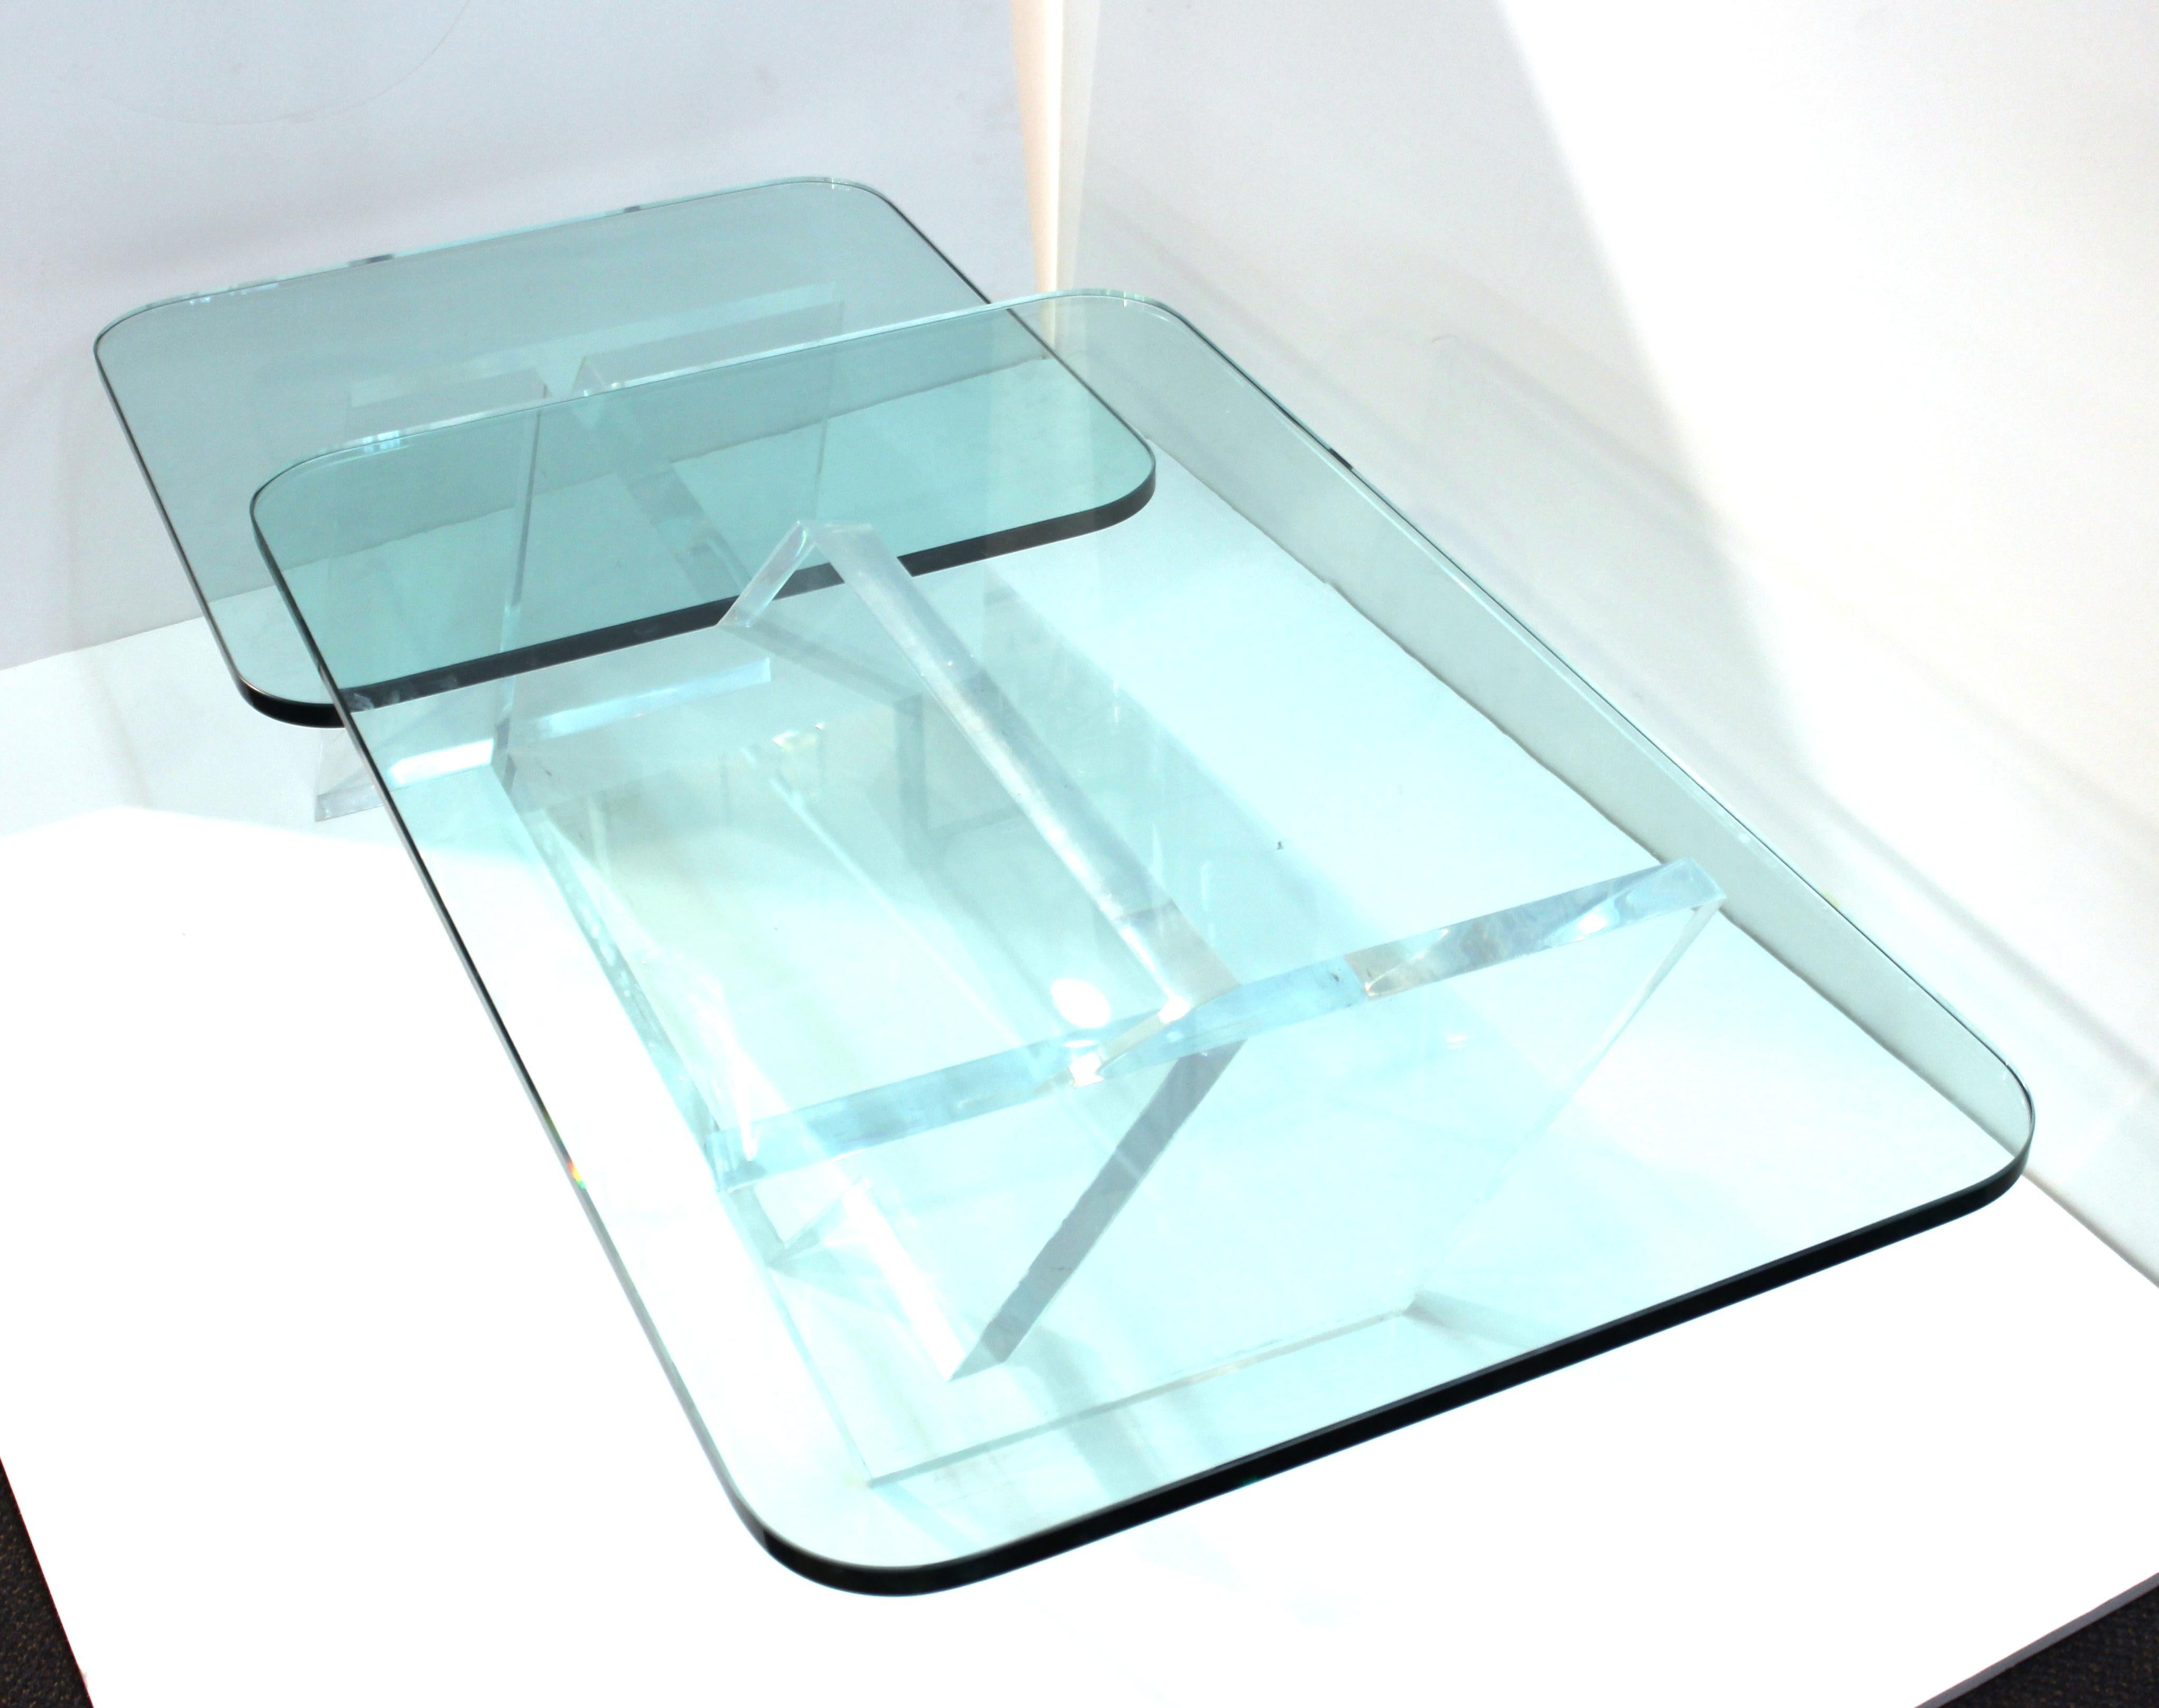 Late 20th Century Modern Lucite base Split-Level Glass Top Cocktail Table